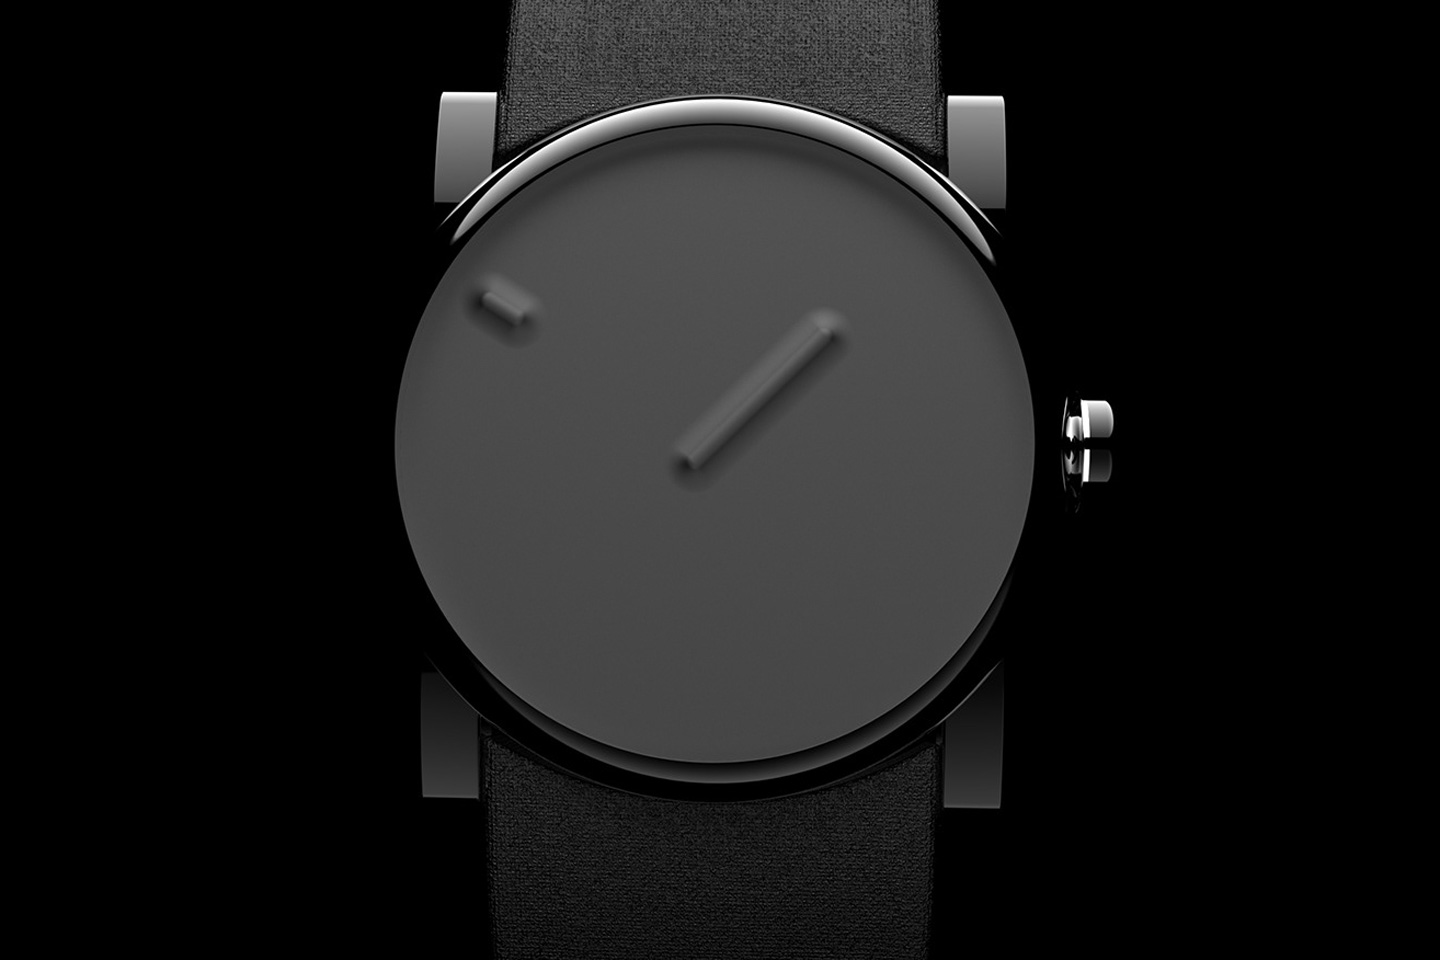 #Minimalist watch uses depth and a tactile surface to let you see and feel time